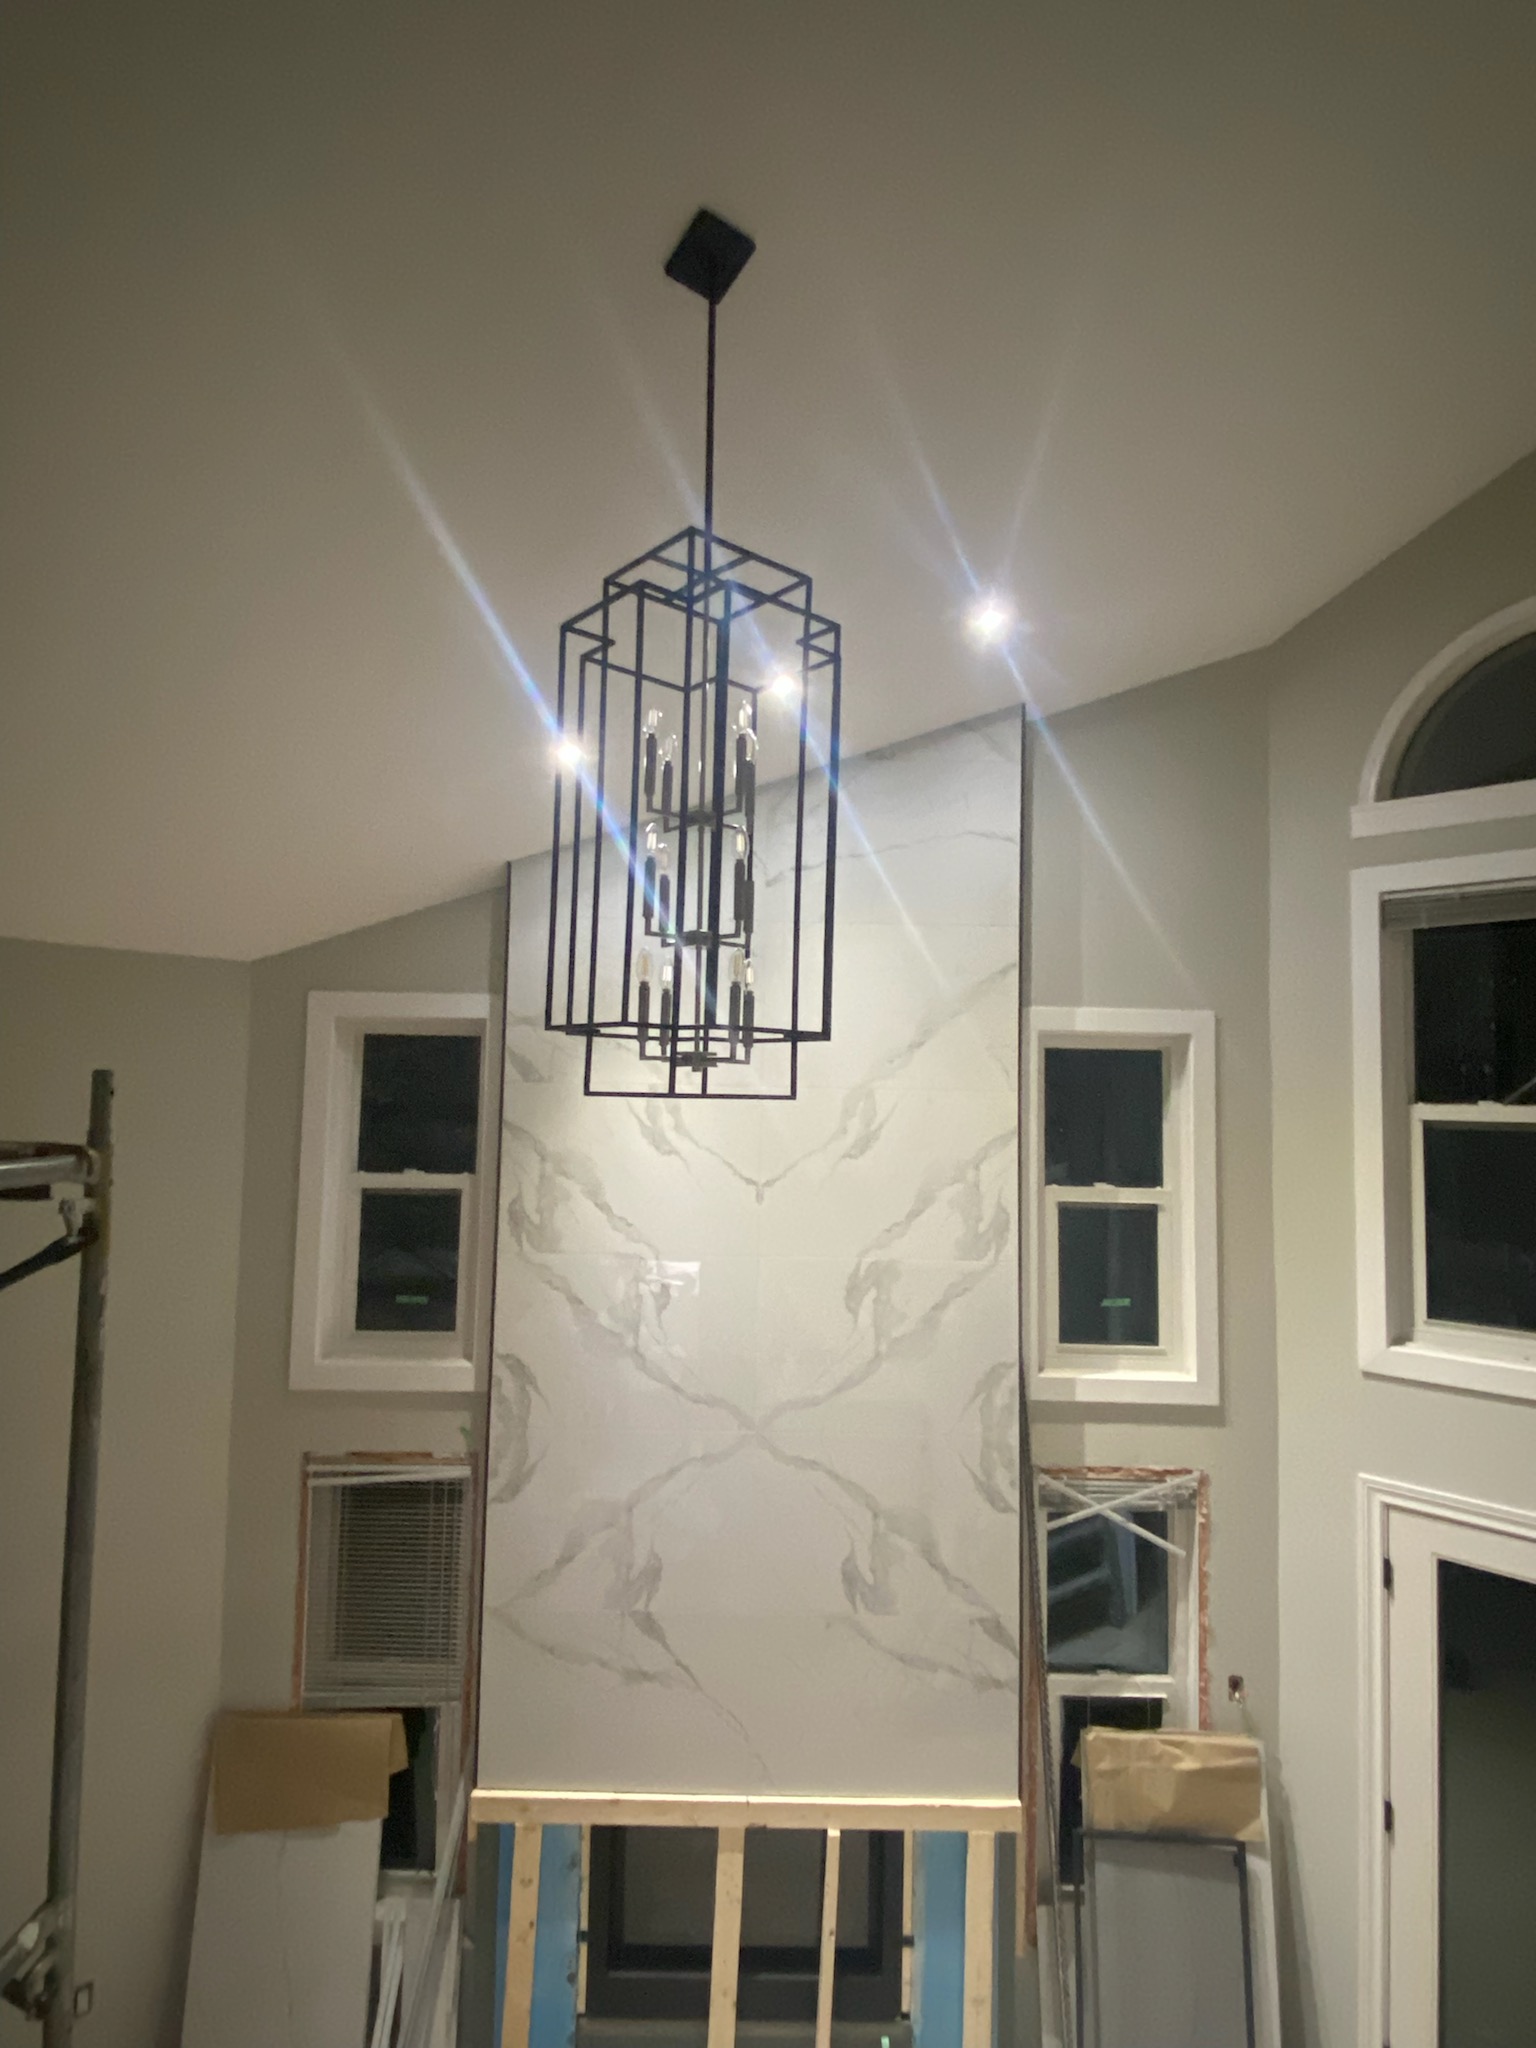 The after of a custom wall and lighting installation as part of a living room installation